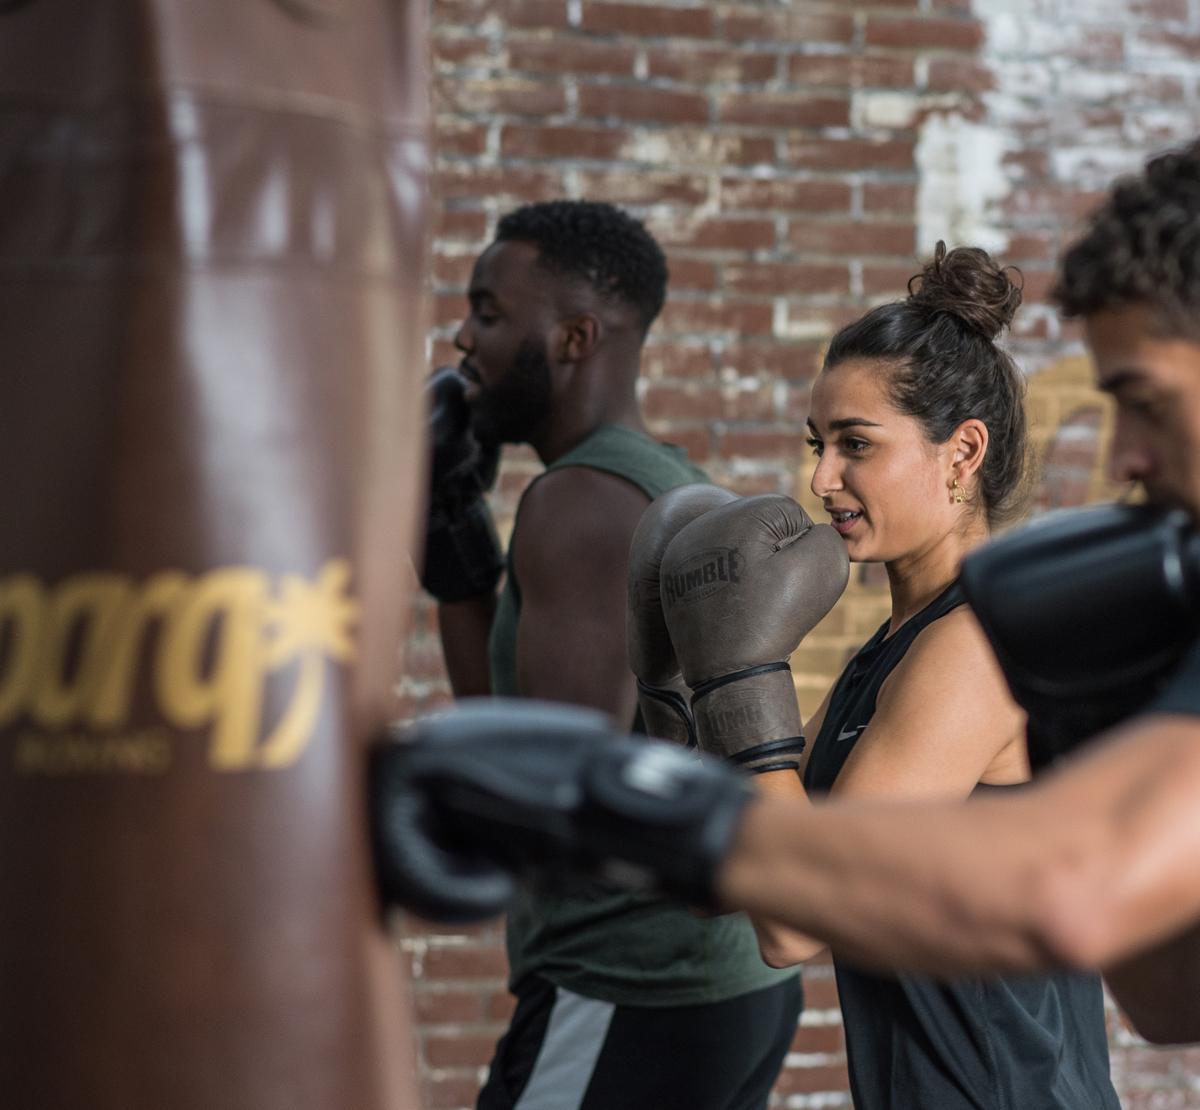 Workout Anytime wanted an app that met the needs of its digitally-savvy members / Photo: Shutterstock/Prostock-studio